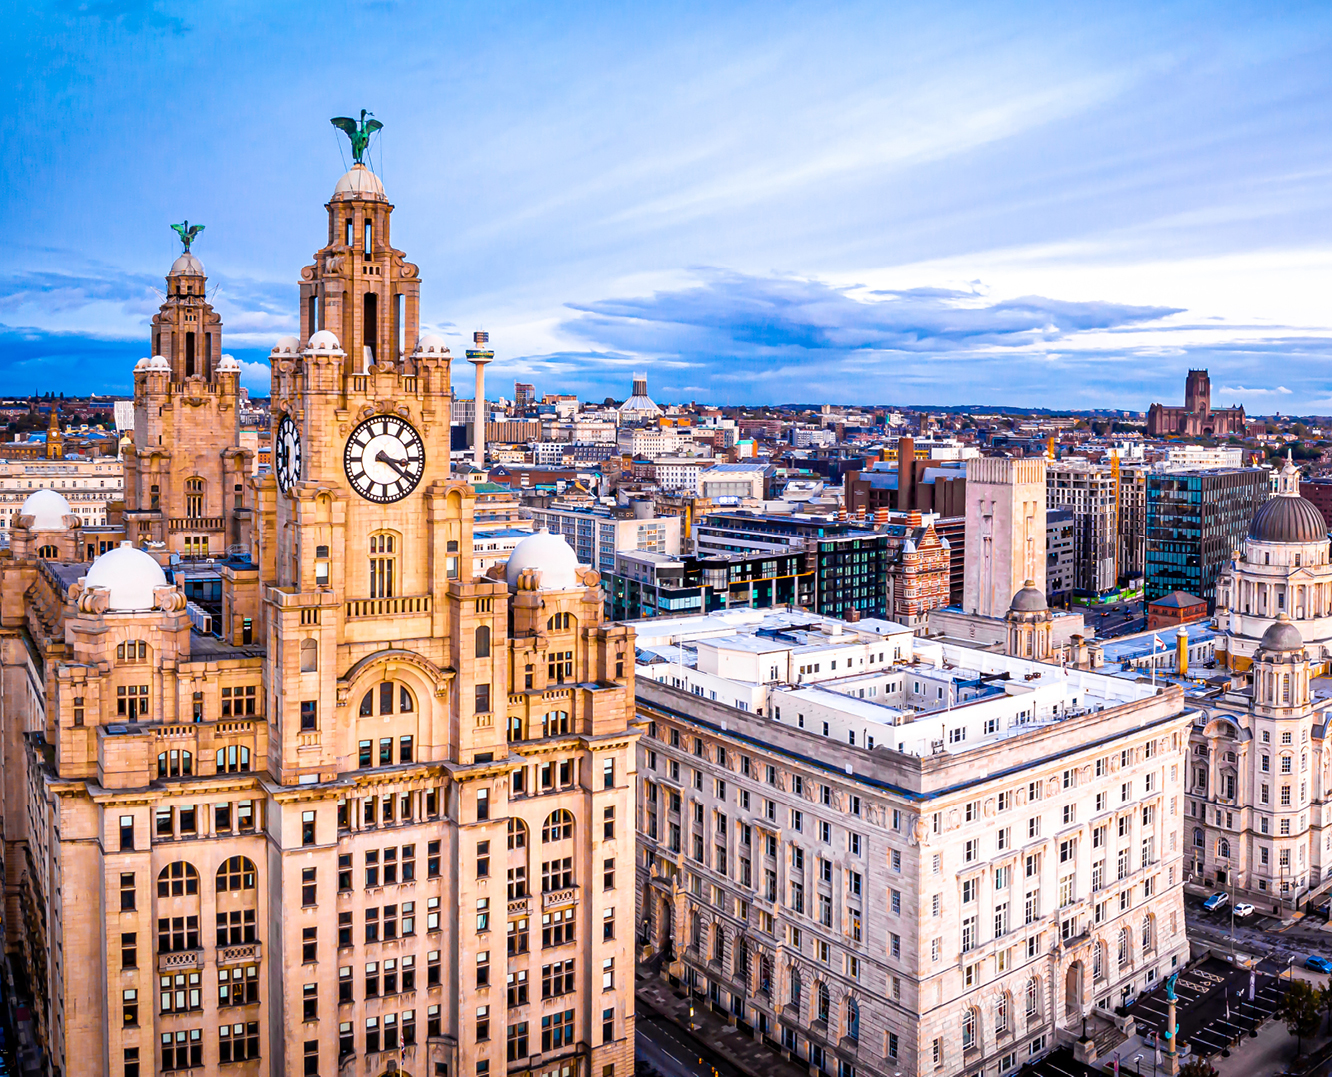 Skyline of the city of Liverpool